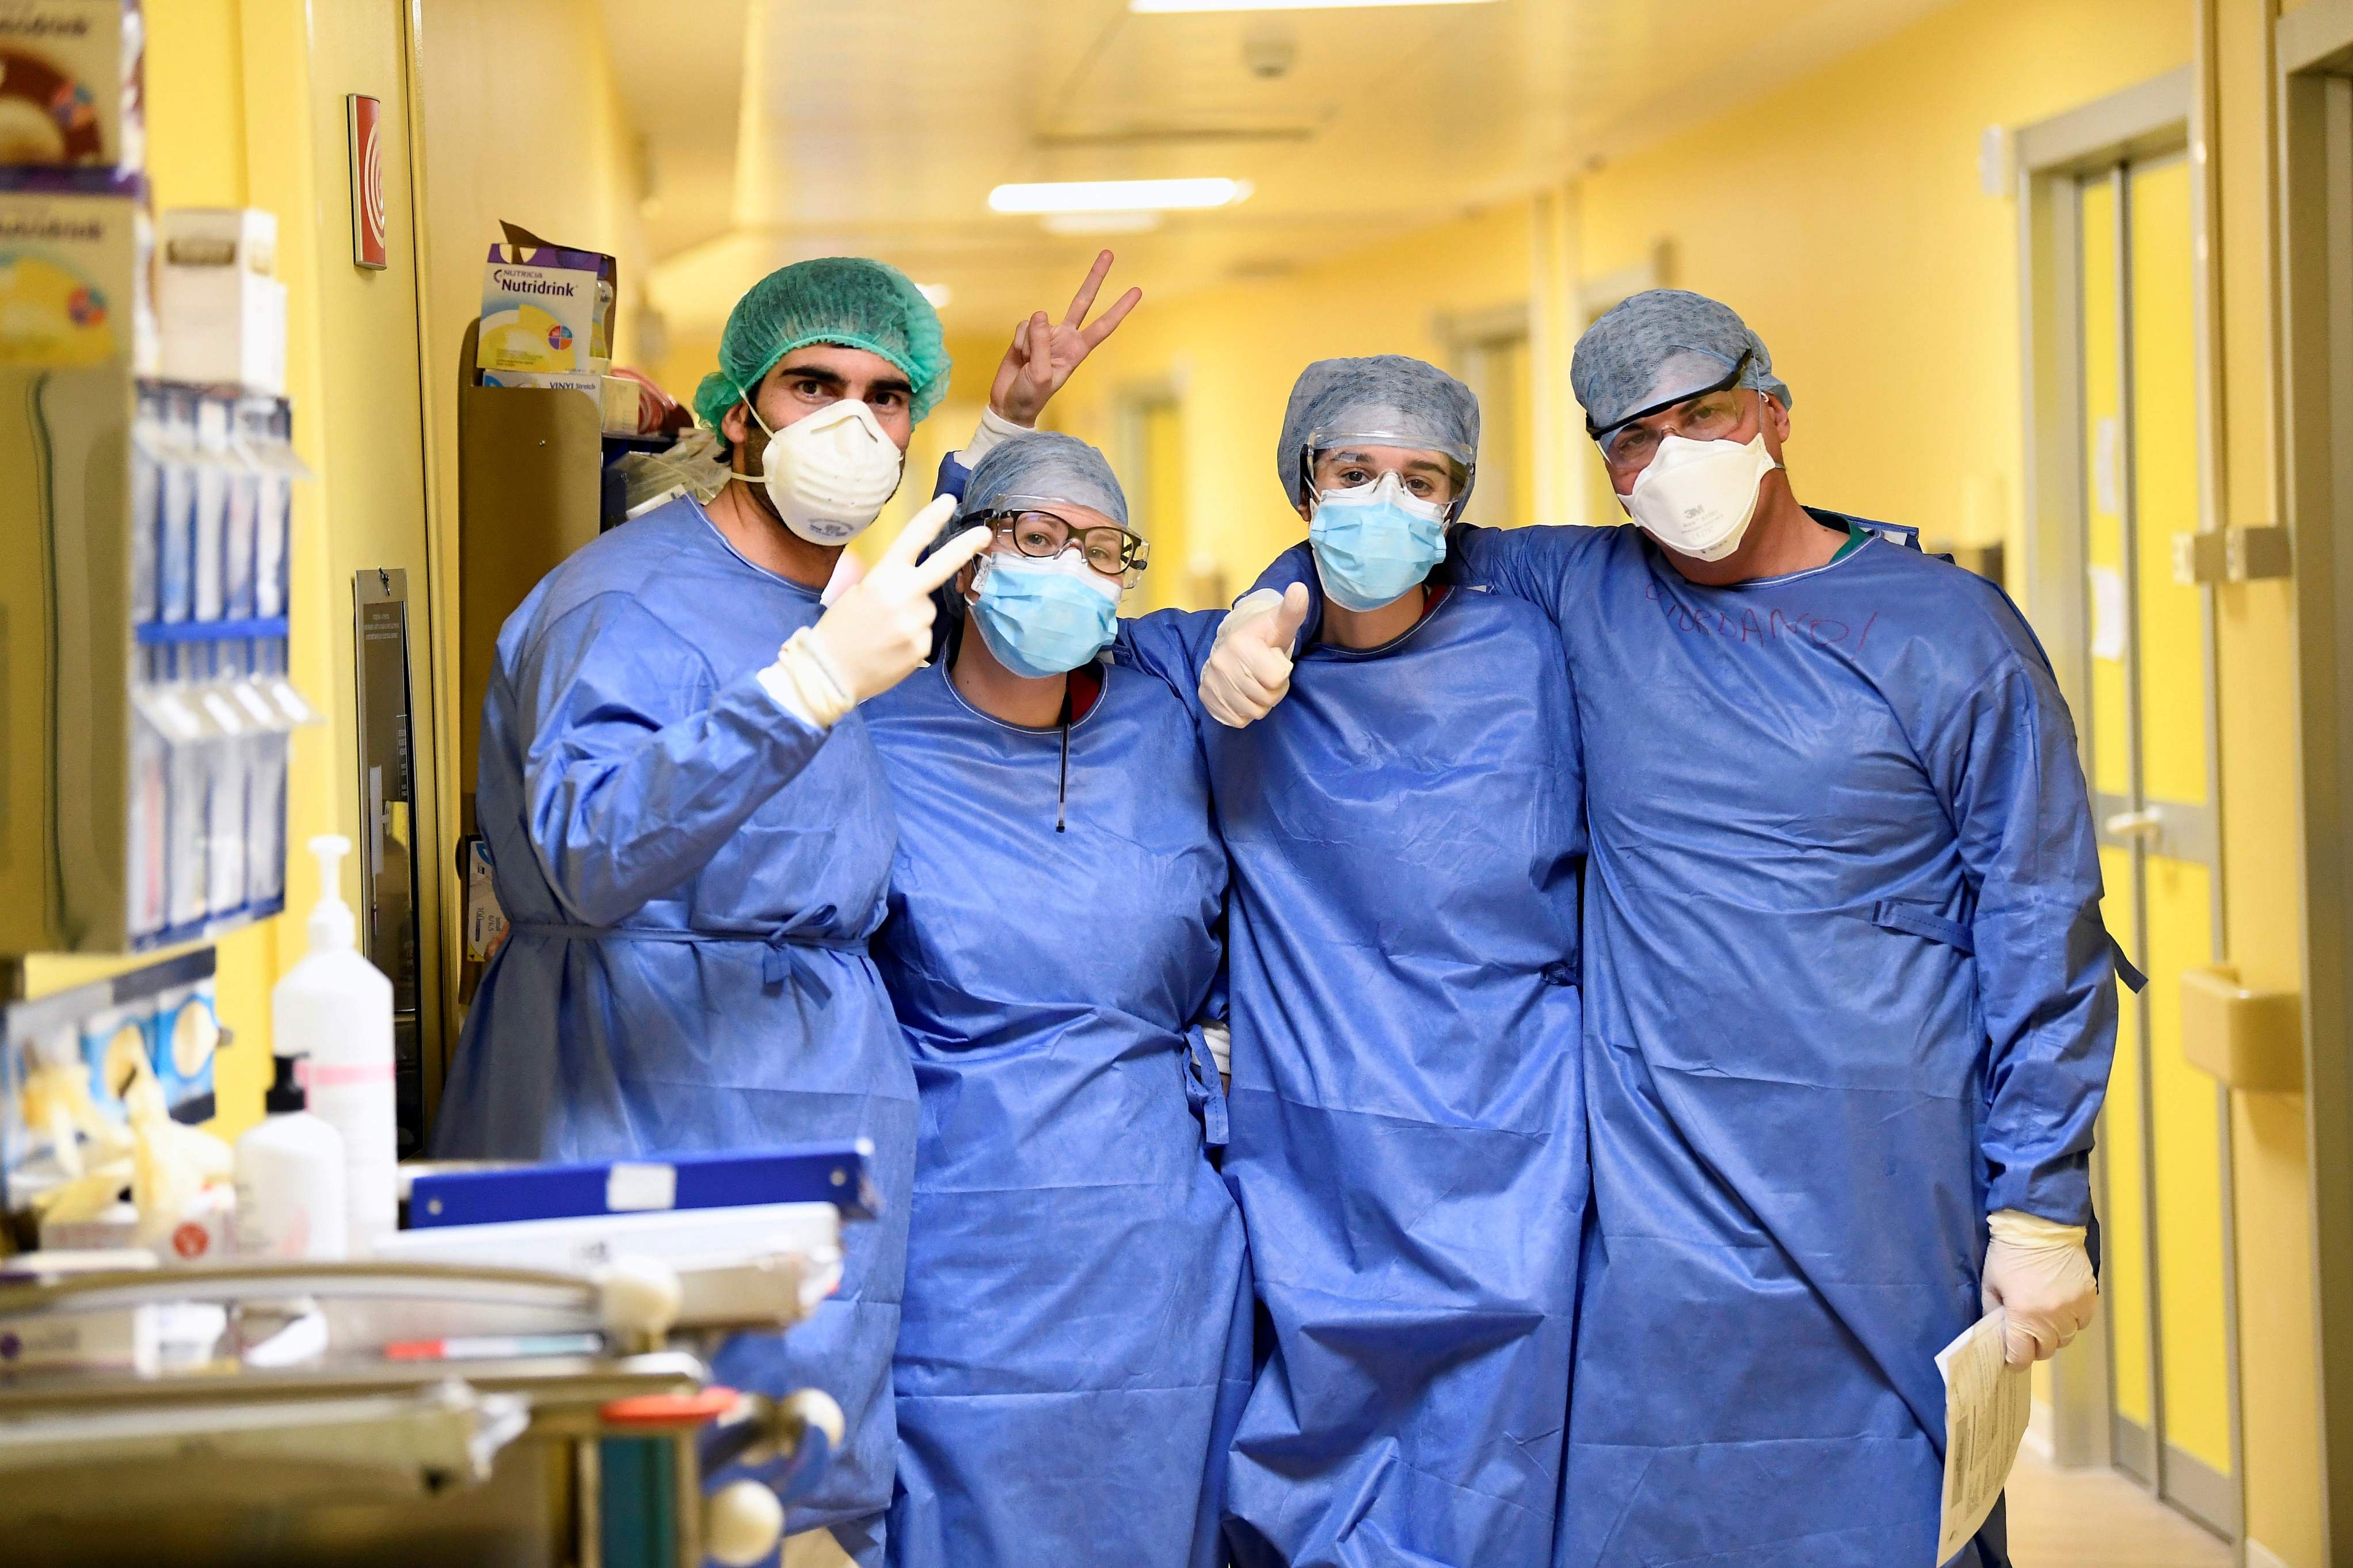 Members of the medical staff in protective suits pose for a photo in the COVID-19 intensive care unit at the San Raffaele hospital in Milan. (Credit: Reuters)